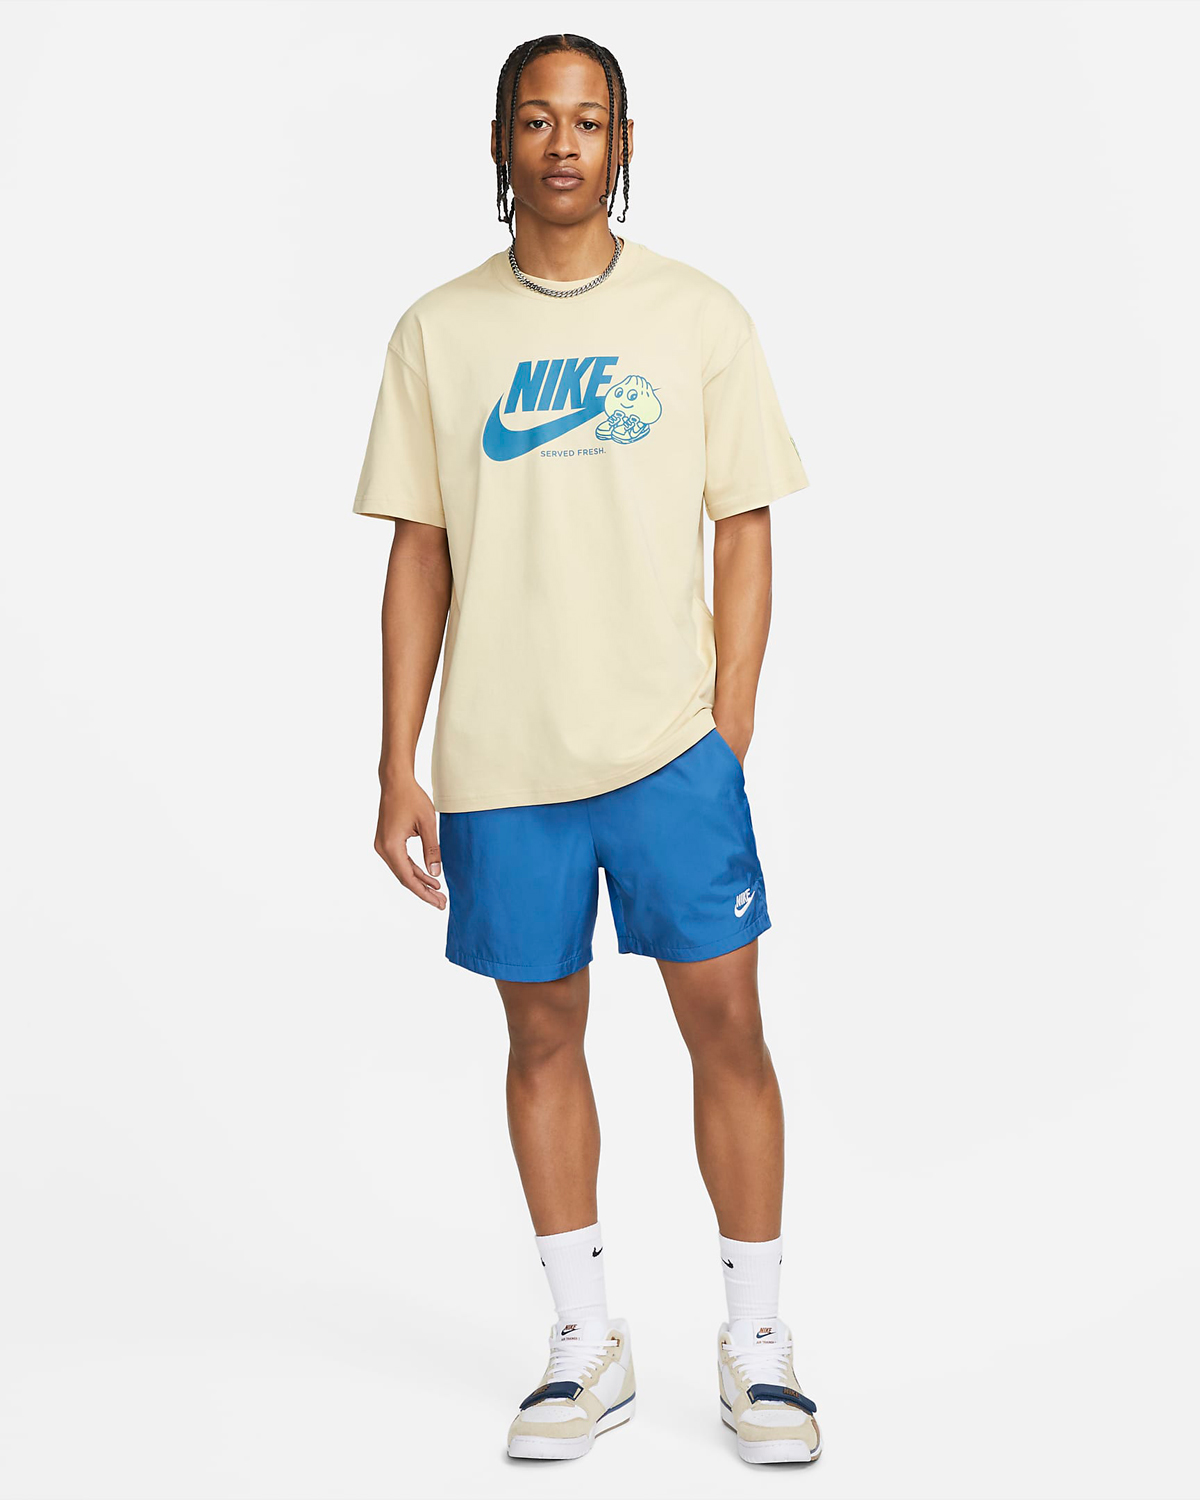 Nike-Sportswear-Sole-Food-T-Shirt-Team-Gold-Outfit